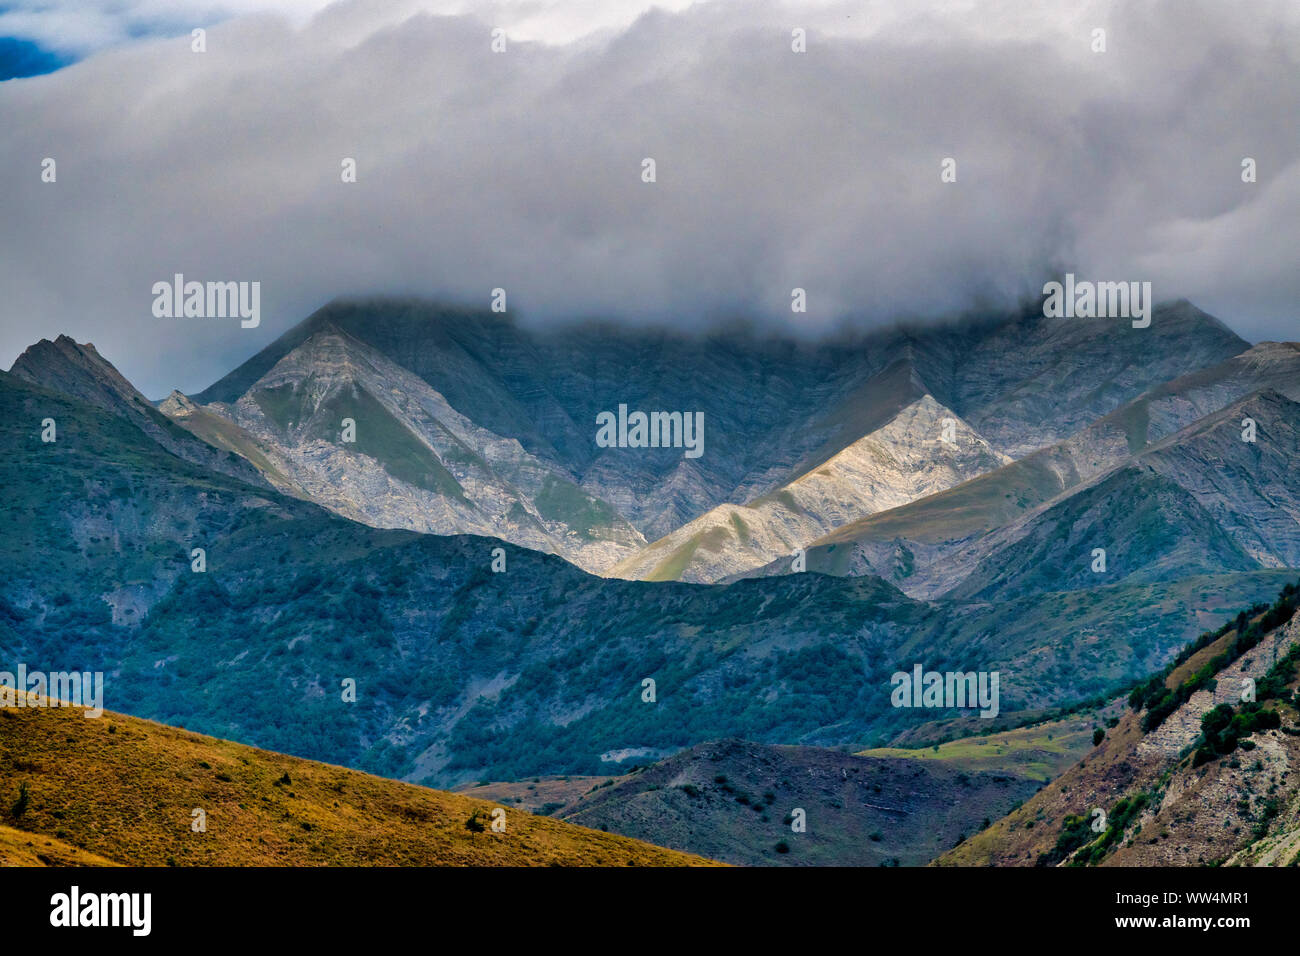 View of the mountains of the Southern Greater Caucasus from the Demirci-Lahij Road, Azerbaijan Stock Photo